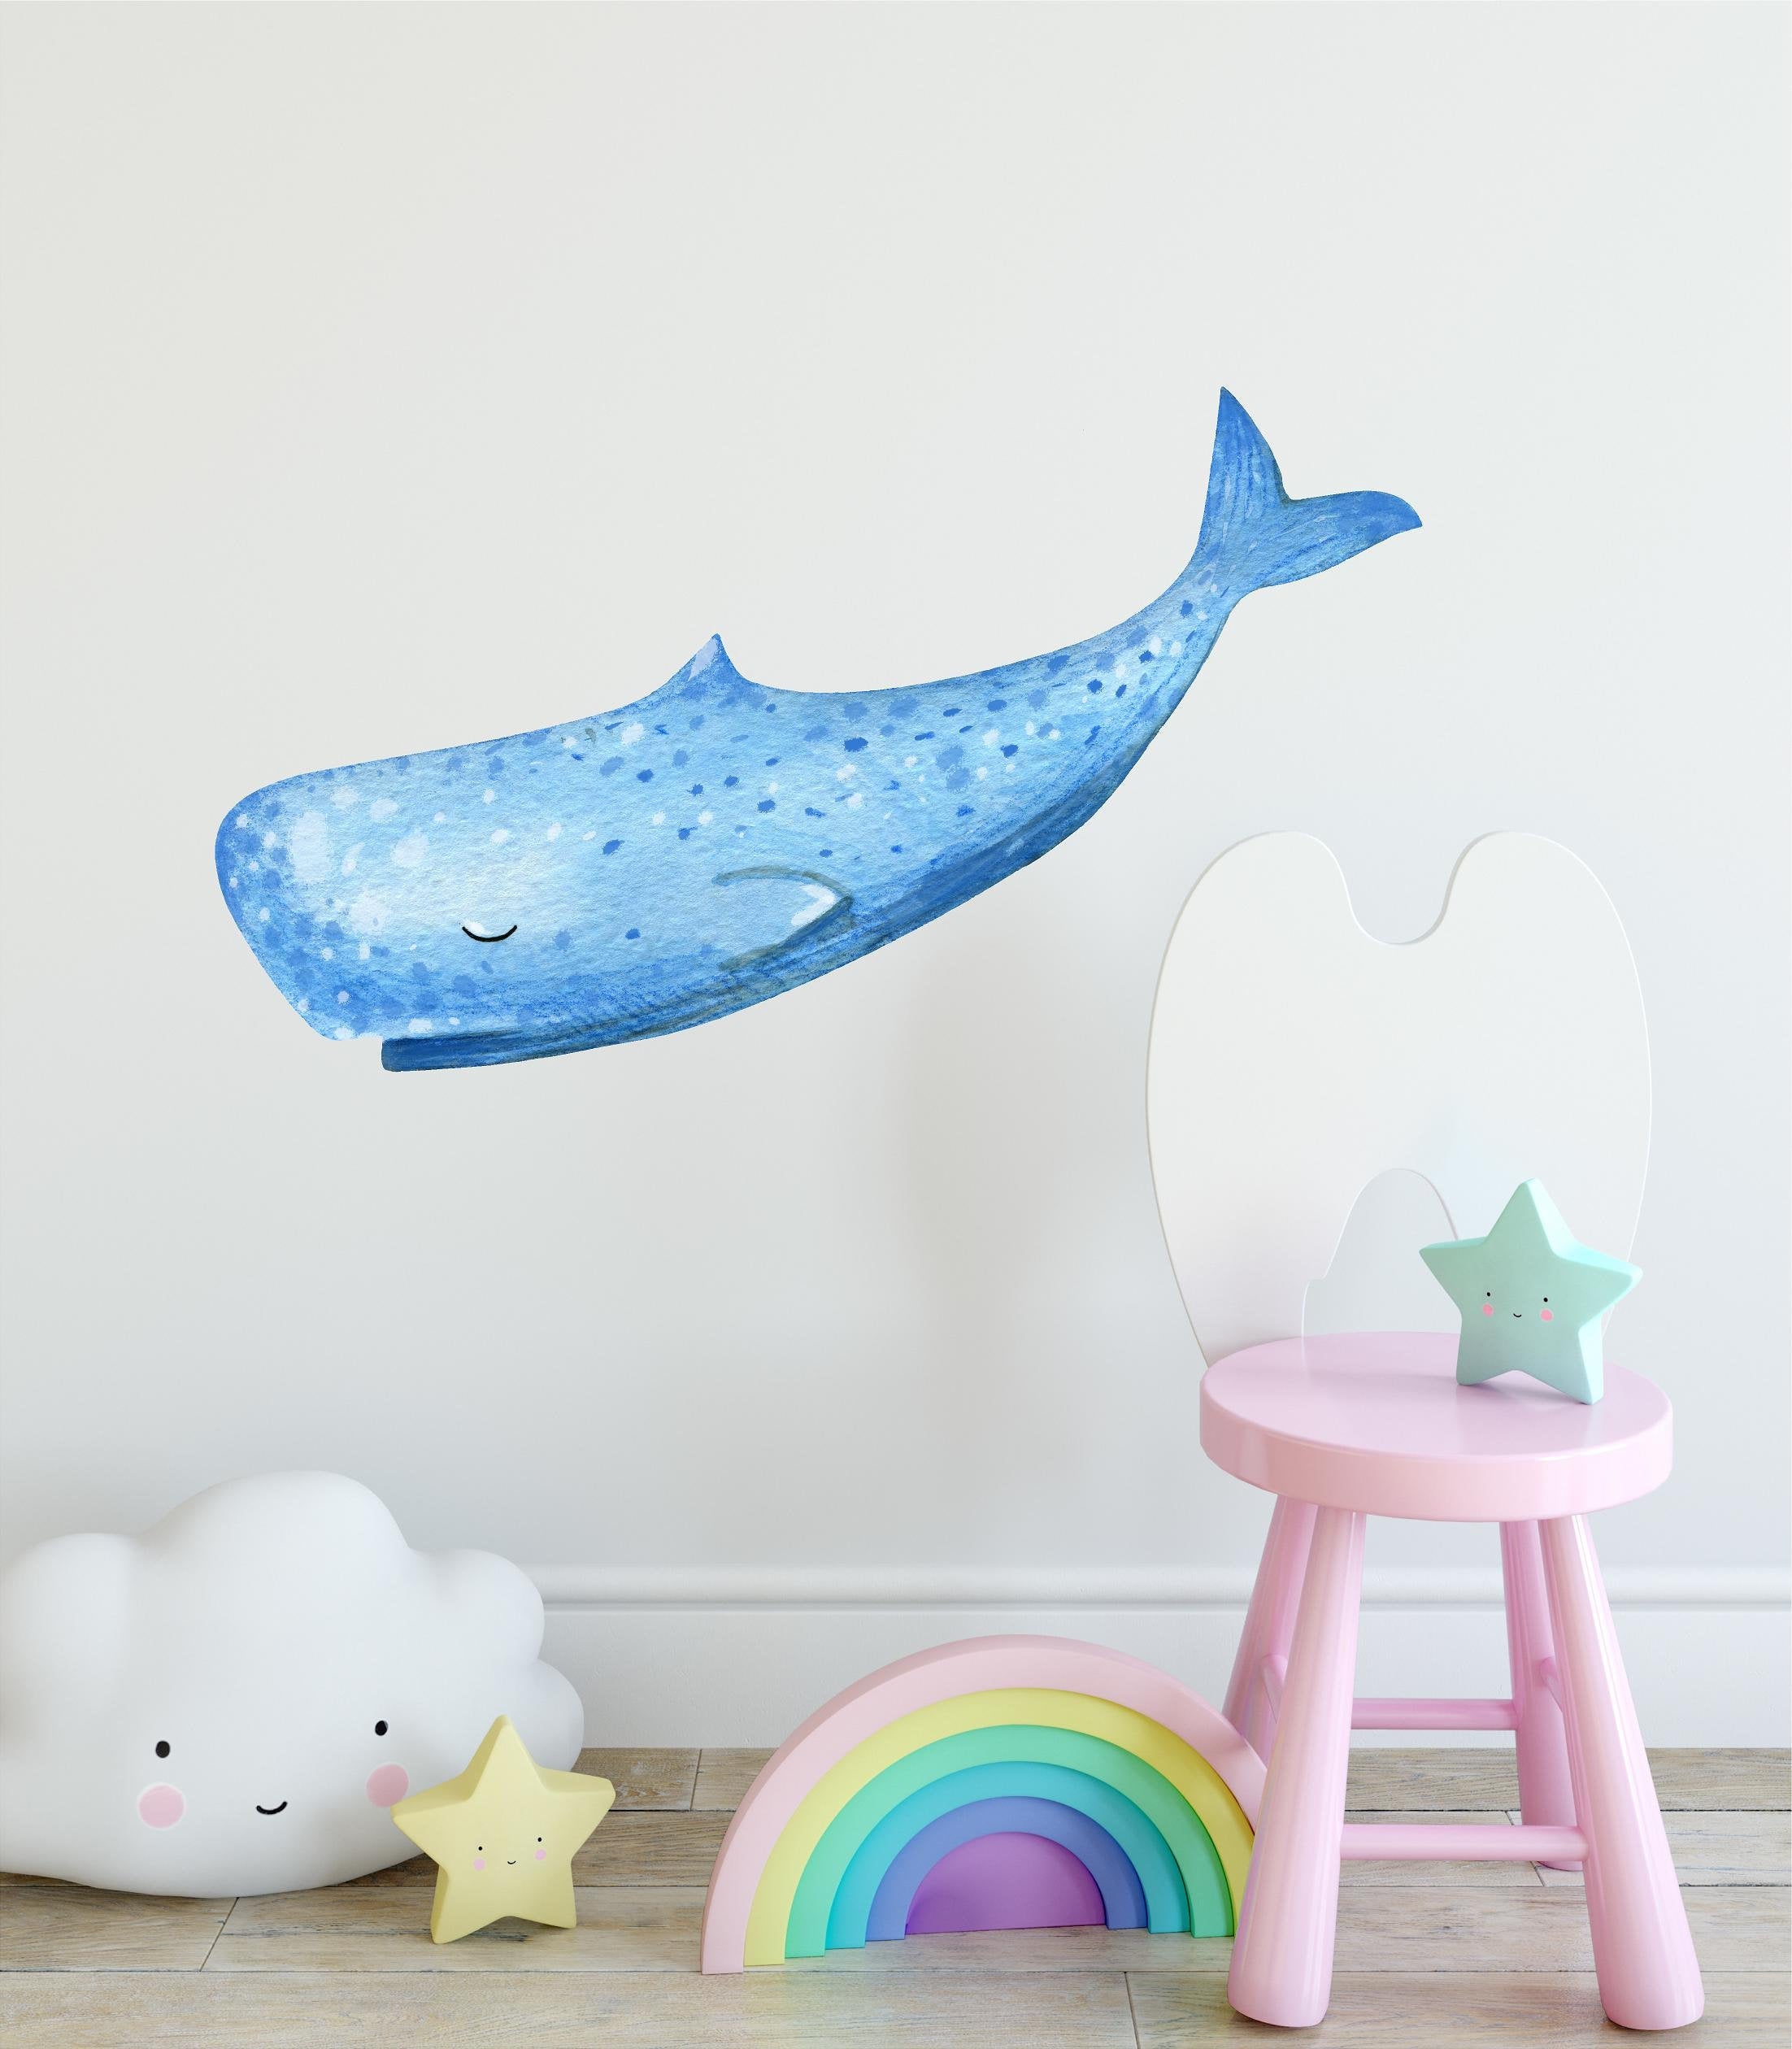 Sleepy Whale Watercolor Wall Decal Whimsical Removable Fabric Vinyl Wall Sticker